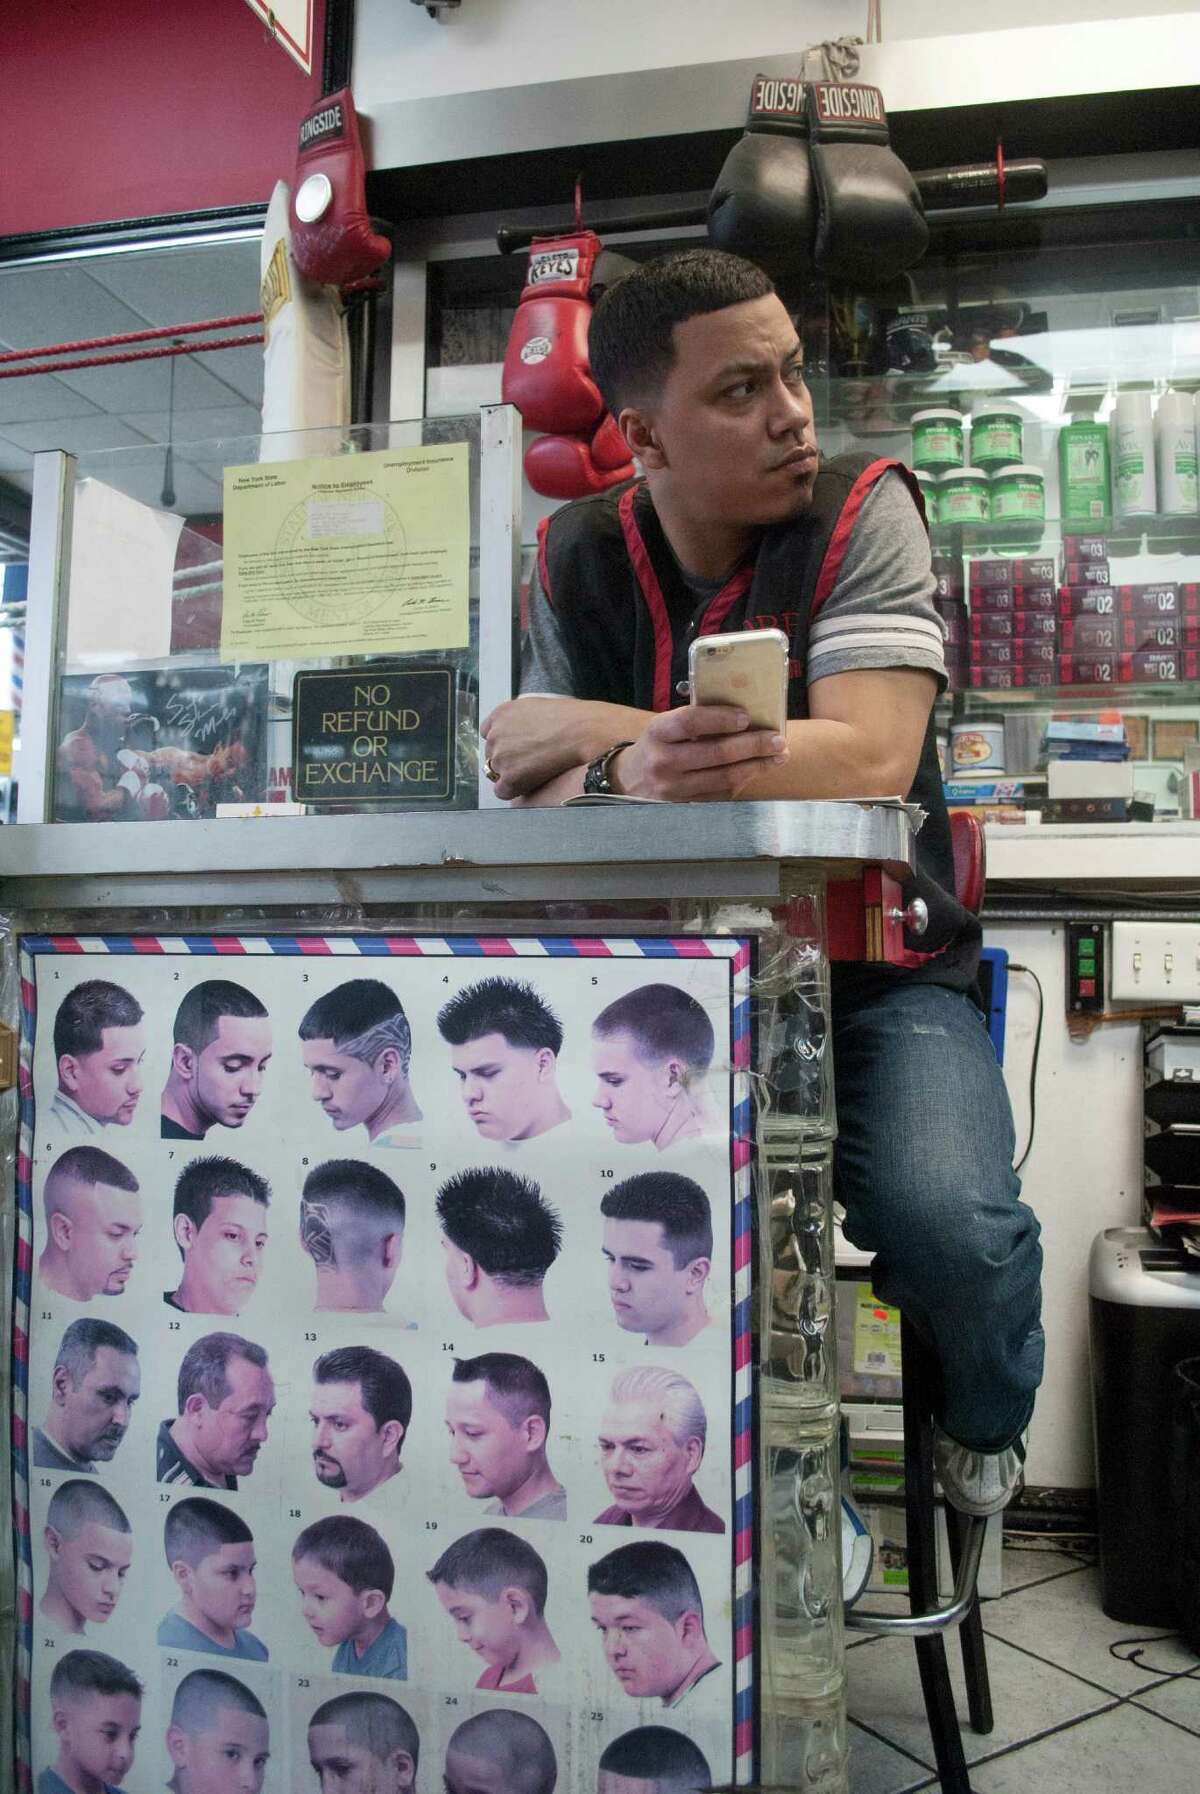 Bronx barber Robert Torres has followed Carlos Correa since he signed at 17 with the Astros. "For him to come into Yankee Stadium and blossom, he came out like an All-Star. HeÂ?’s not afraid.Â?”Â ( Hunter Atkins for the Houston Chronicle )